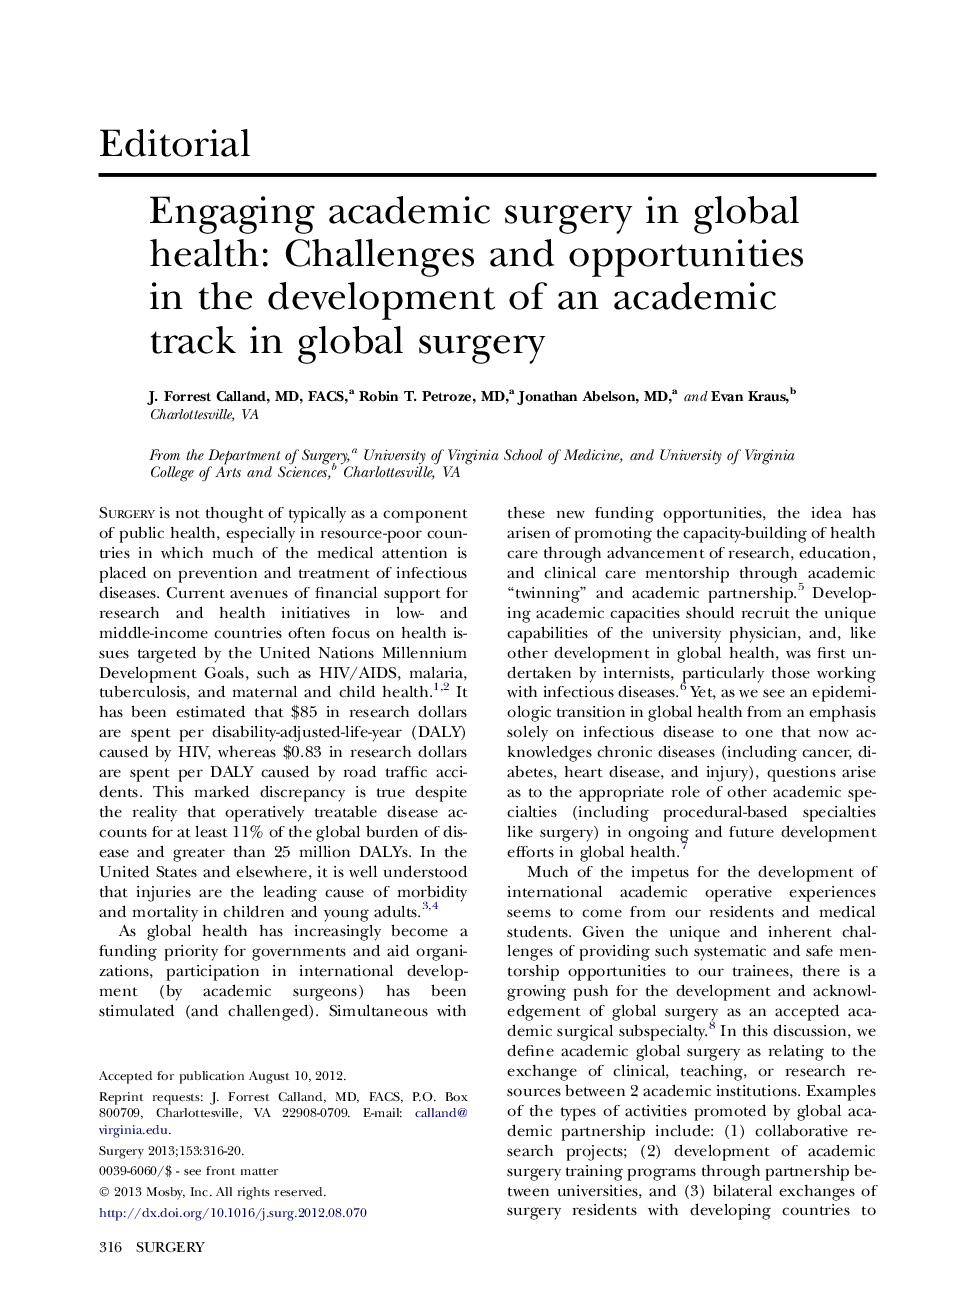 Engaging academic surgery in global health: Challenges and opportunities in the development of an academic track in global surgery